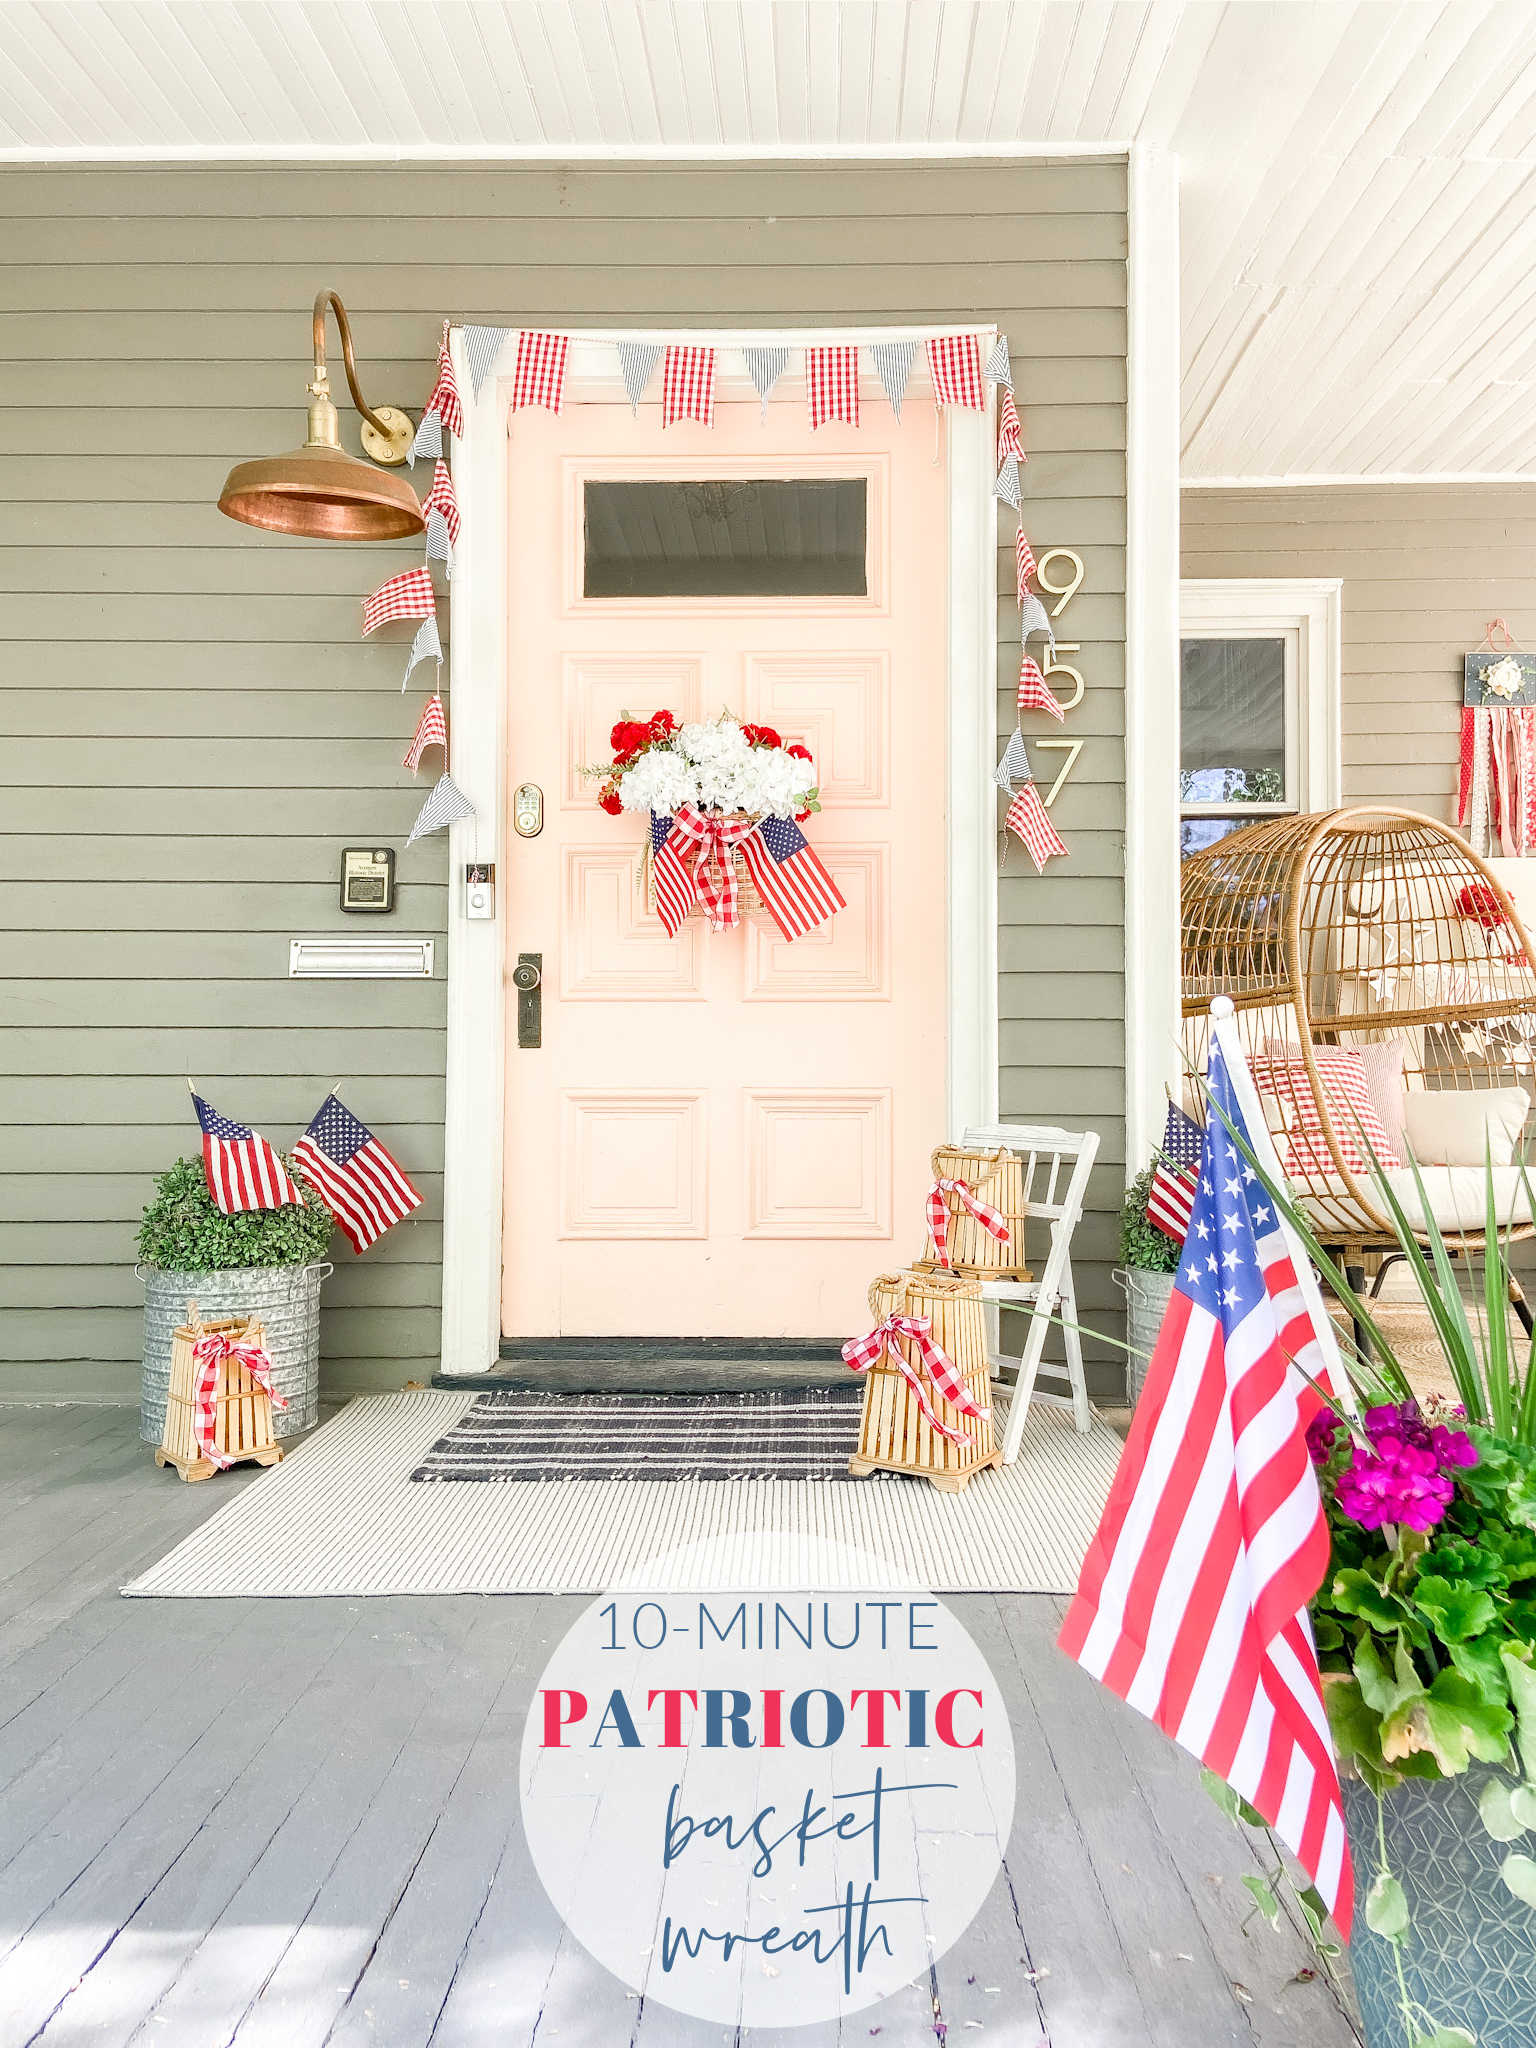 Red white and blue porch ideas with a basket wreath, pennant banner, flags and pillows. 